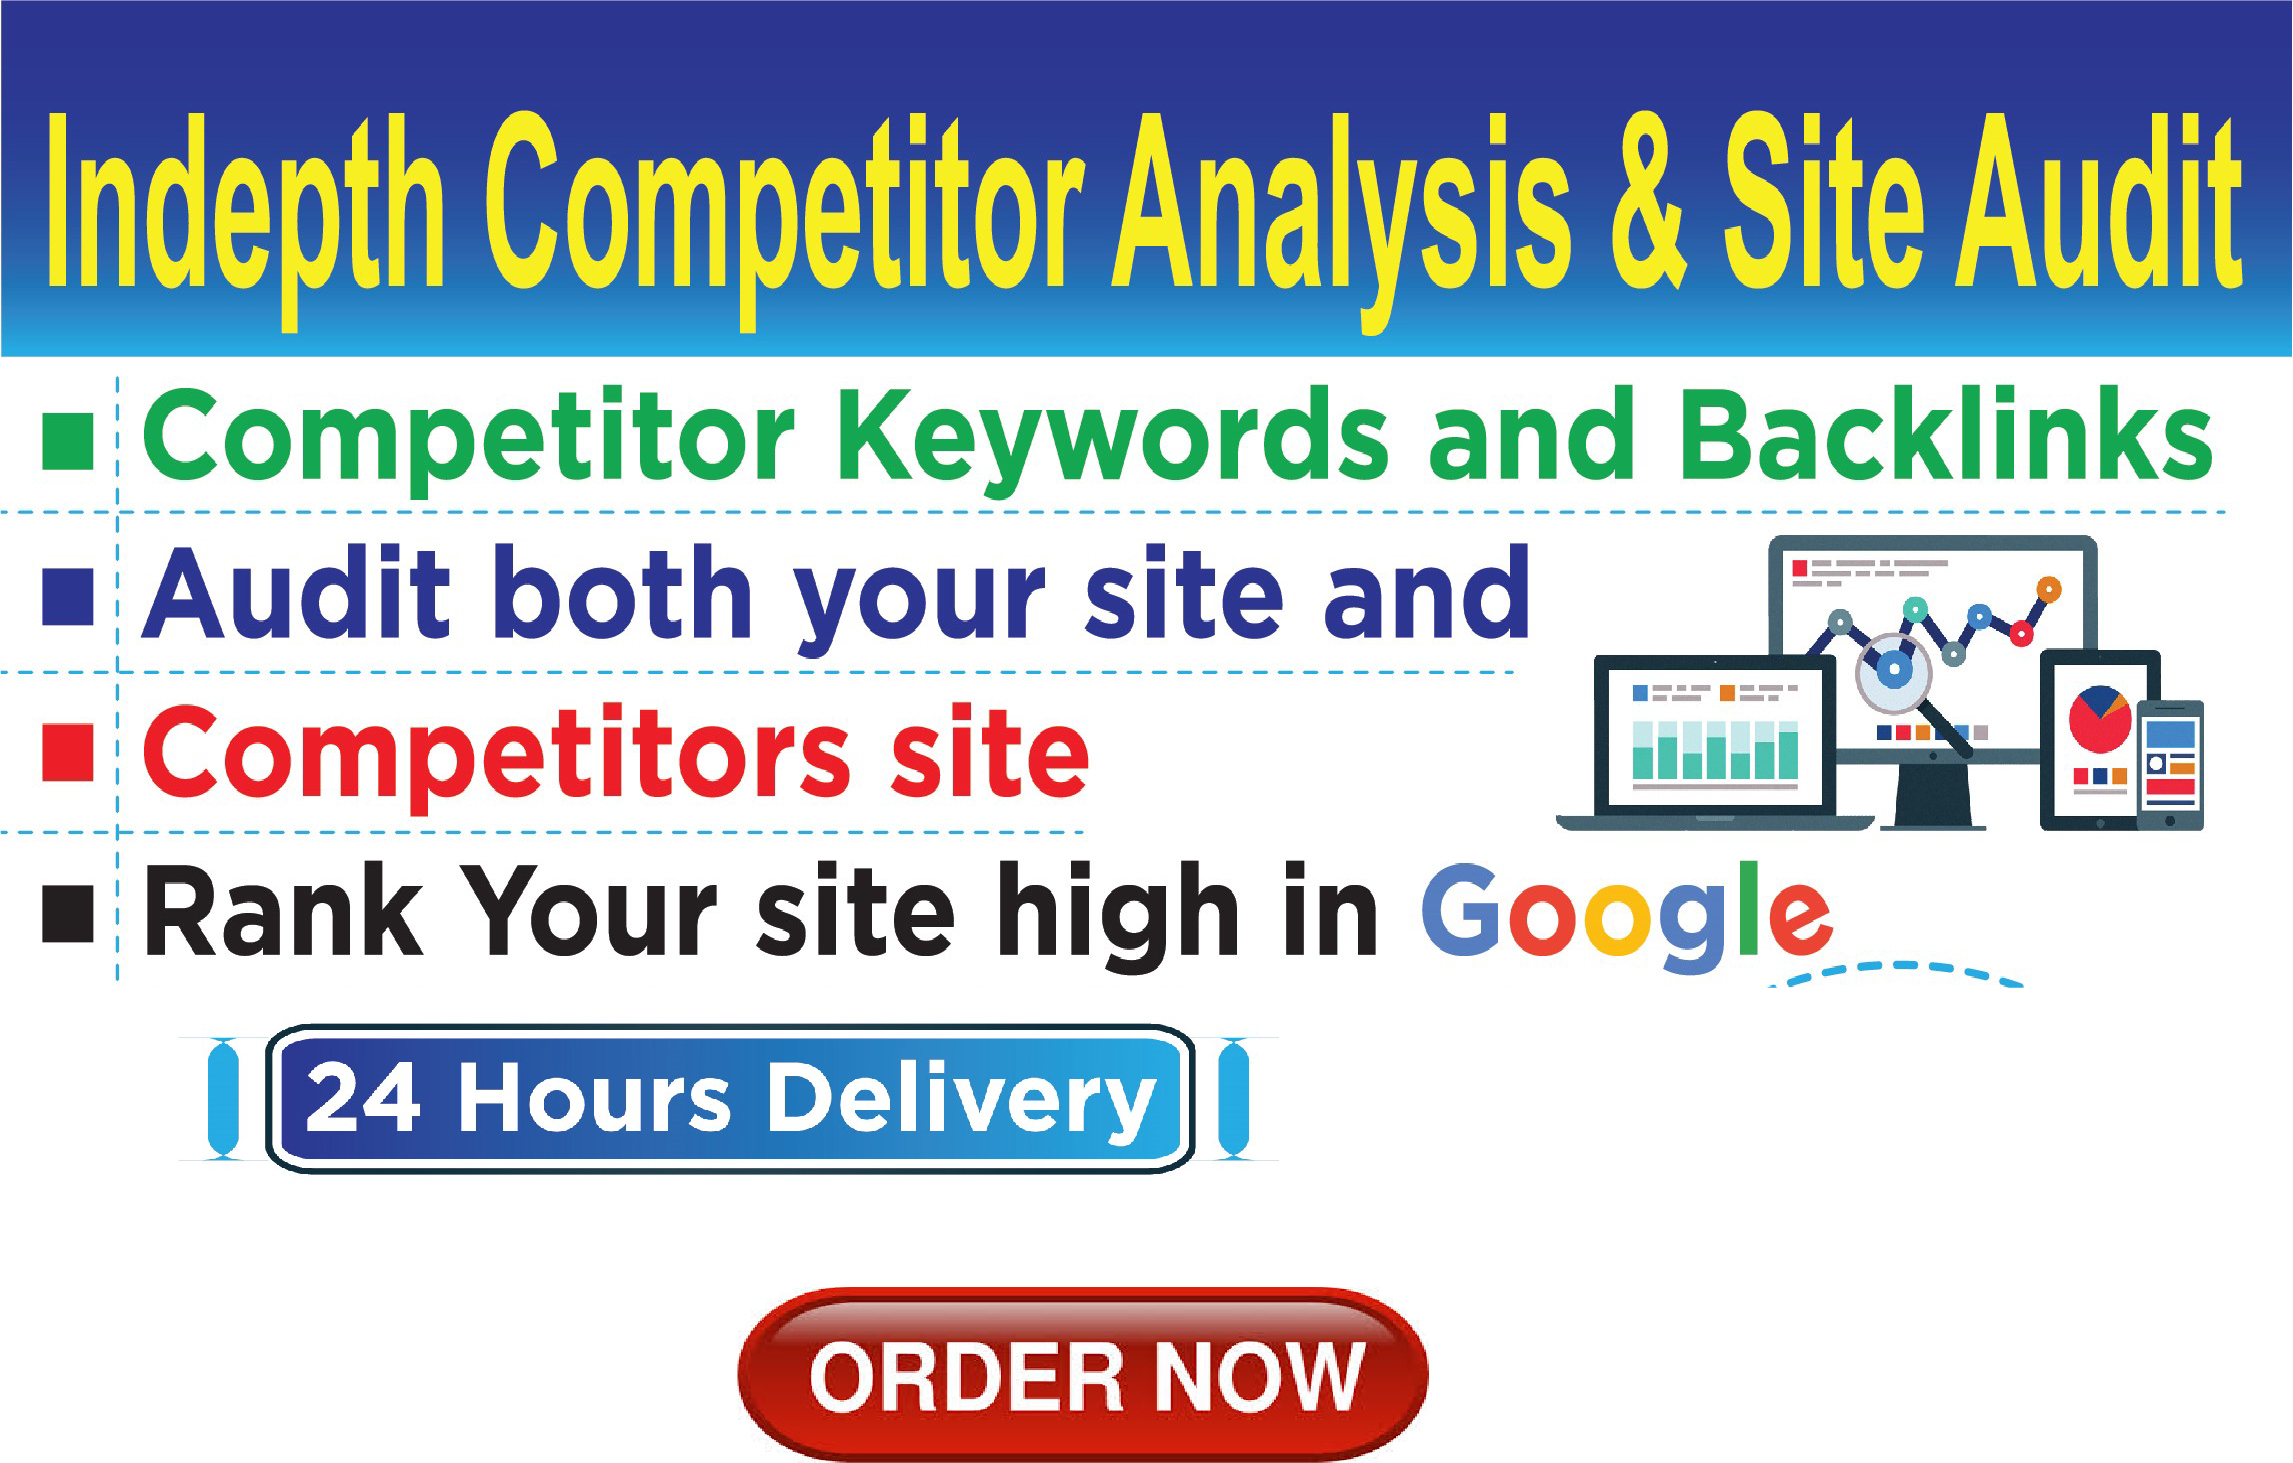 I will do indepth competitor analysis for you